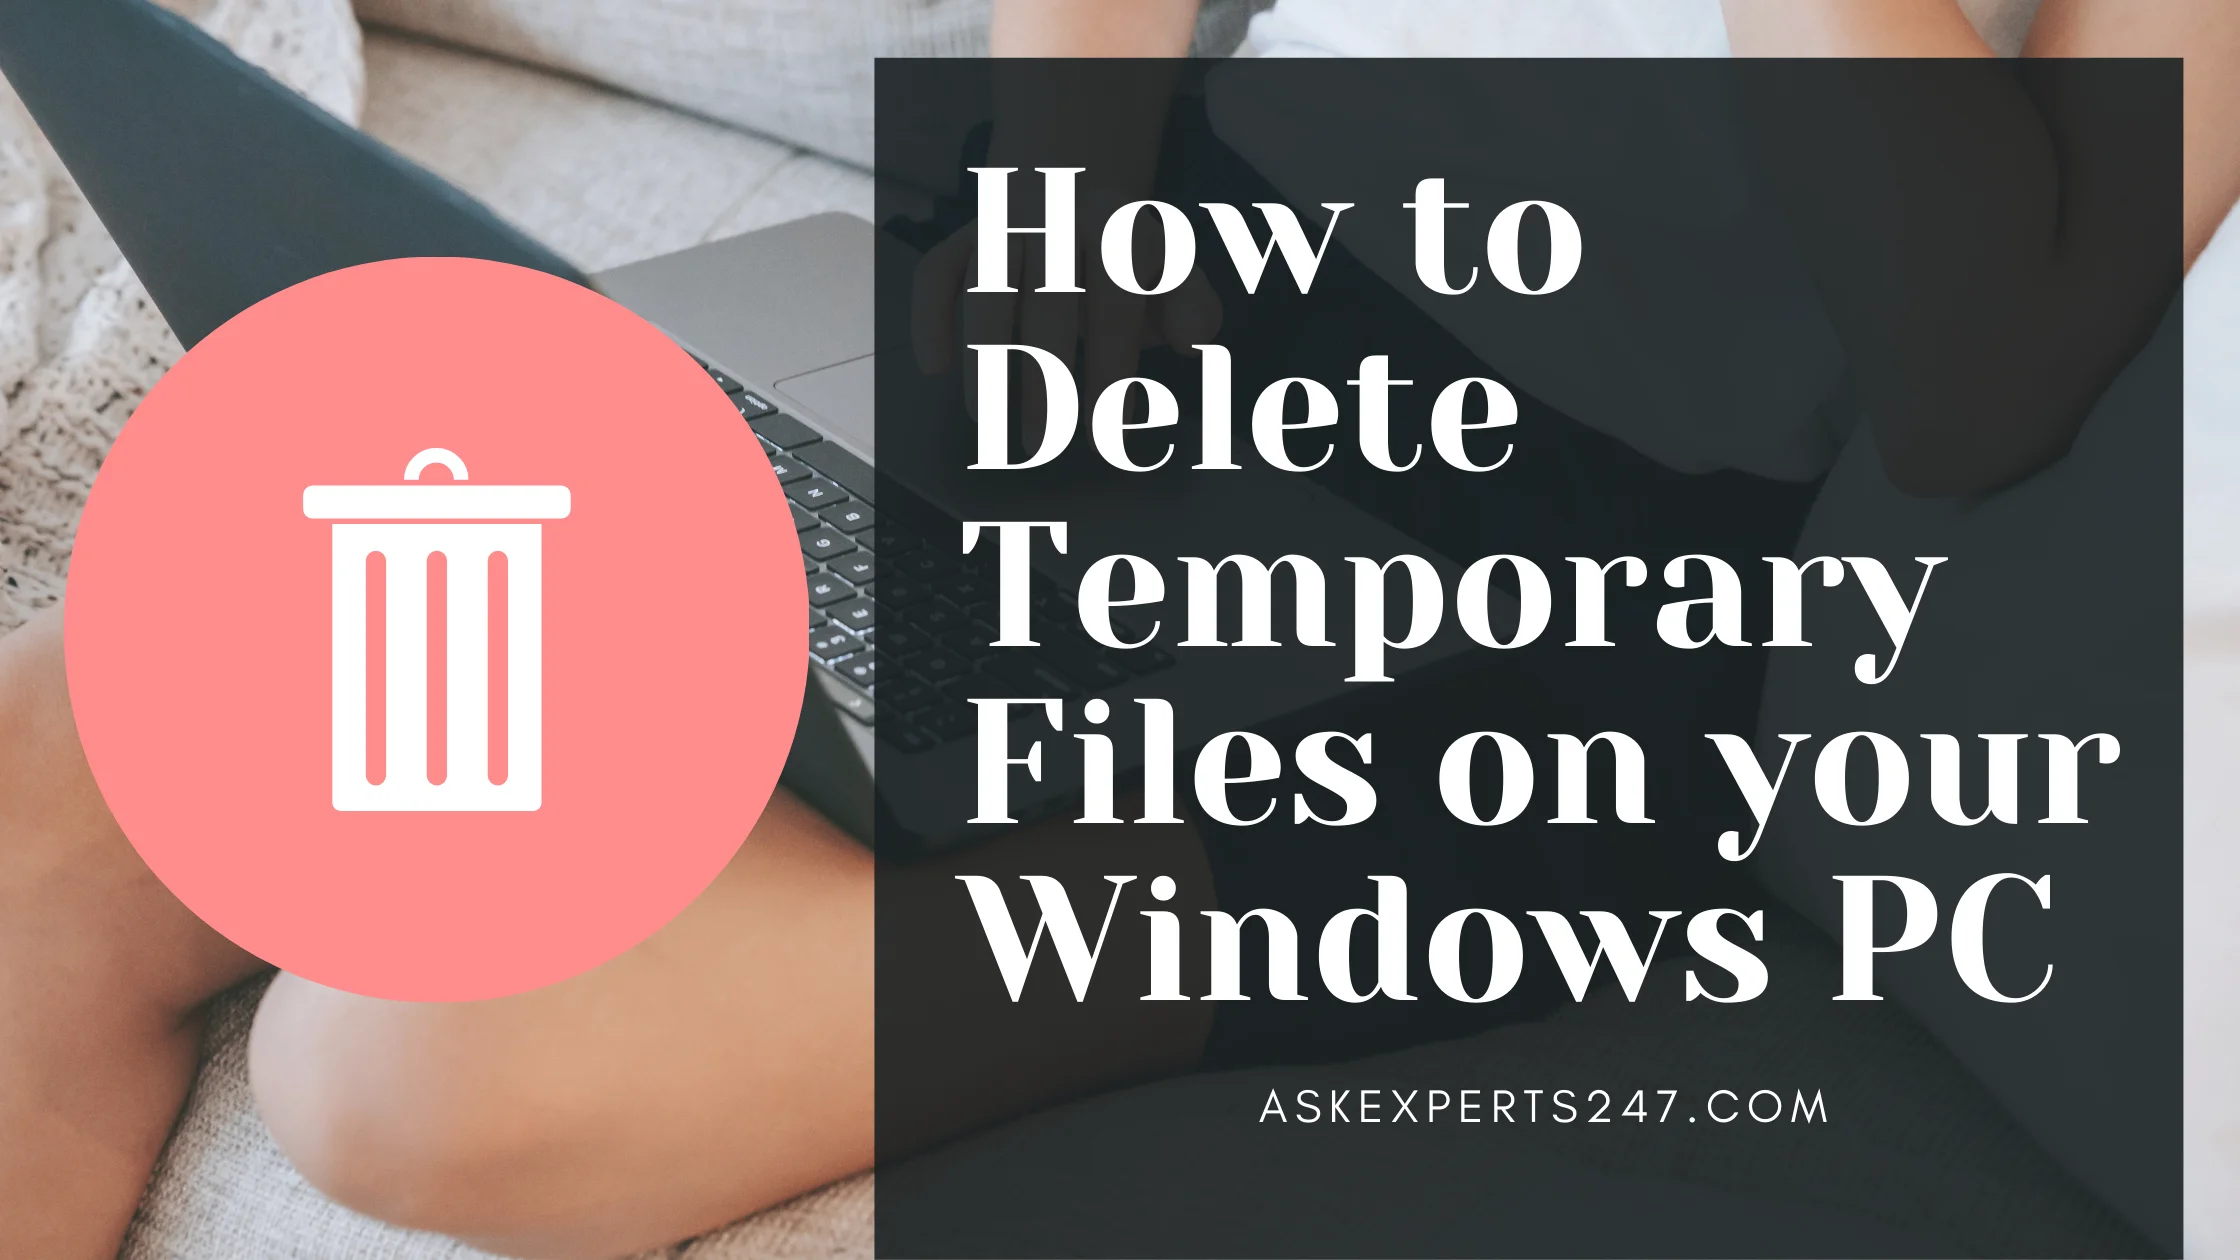 How to Delete Temporary Files on Your Windows PC